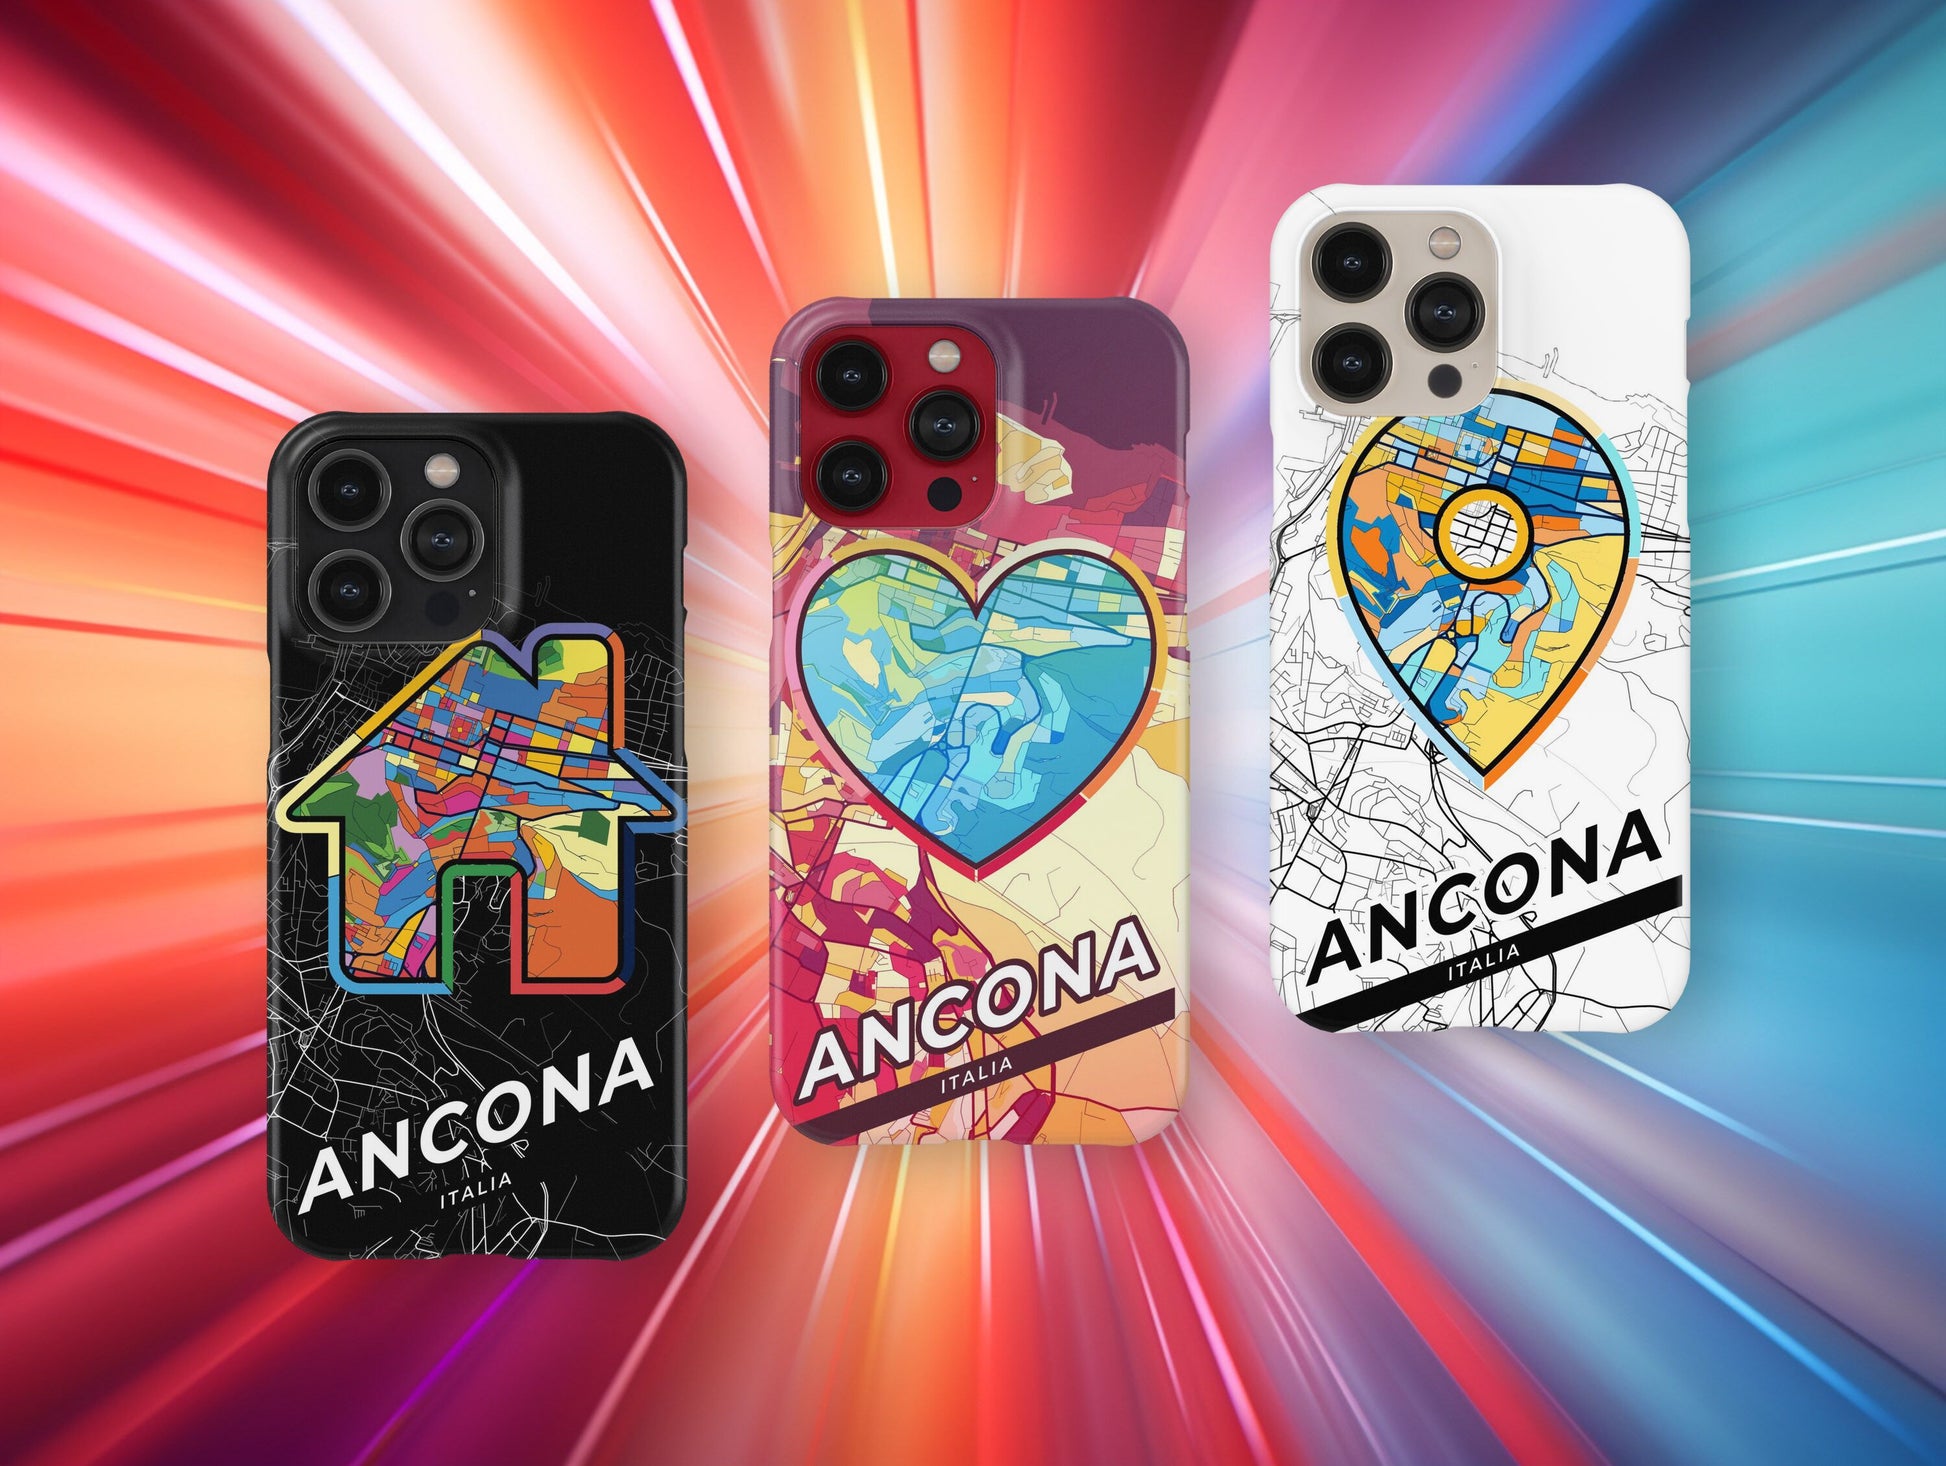 Ancona Italy slim phone case with colorful icon. Birthday, wedding or housewarming gift. Couple match cases.